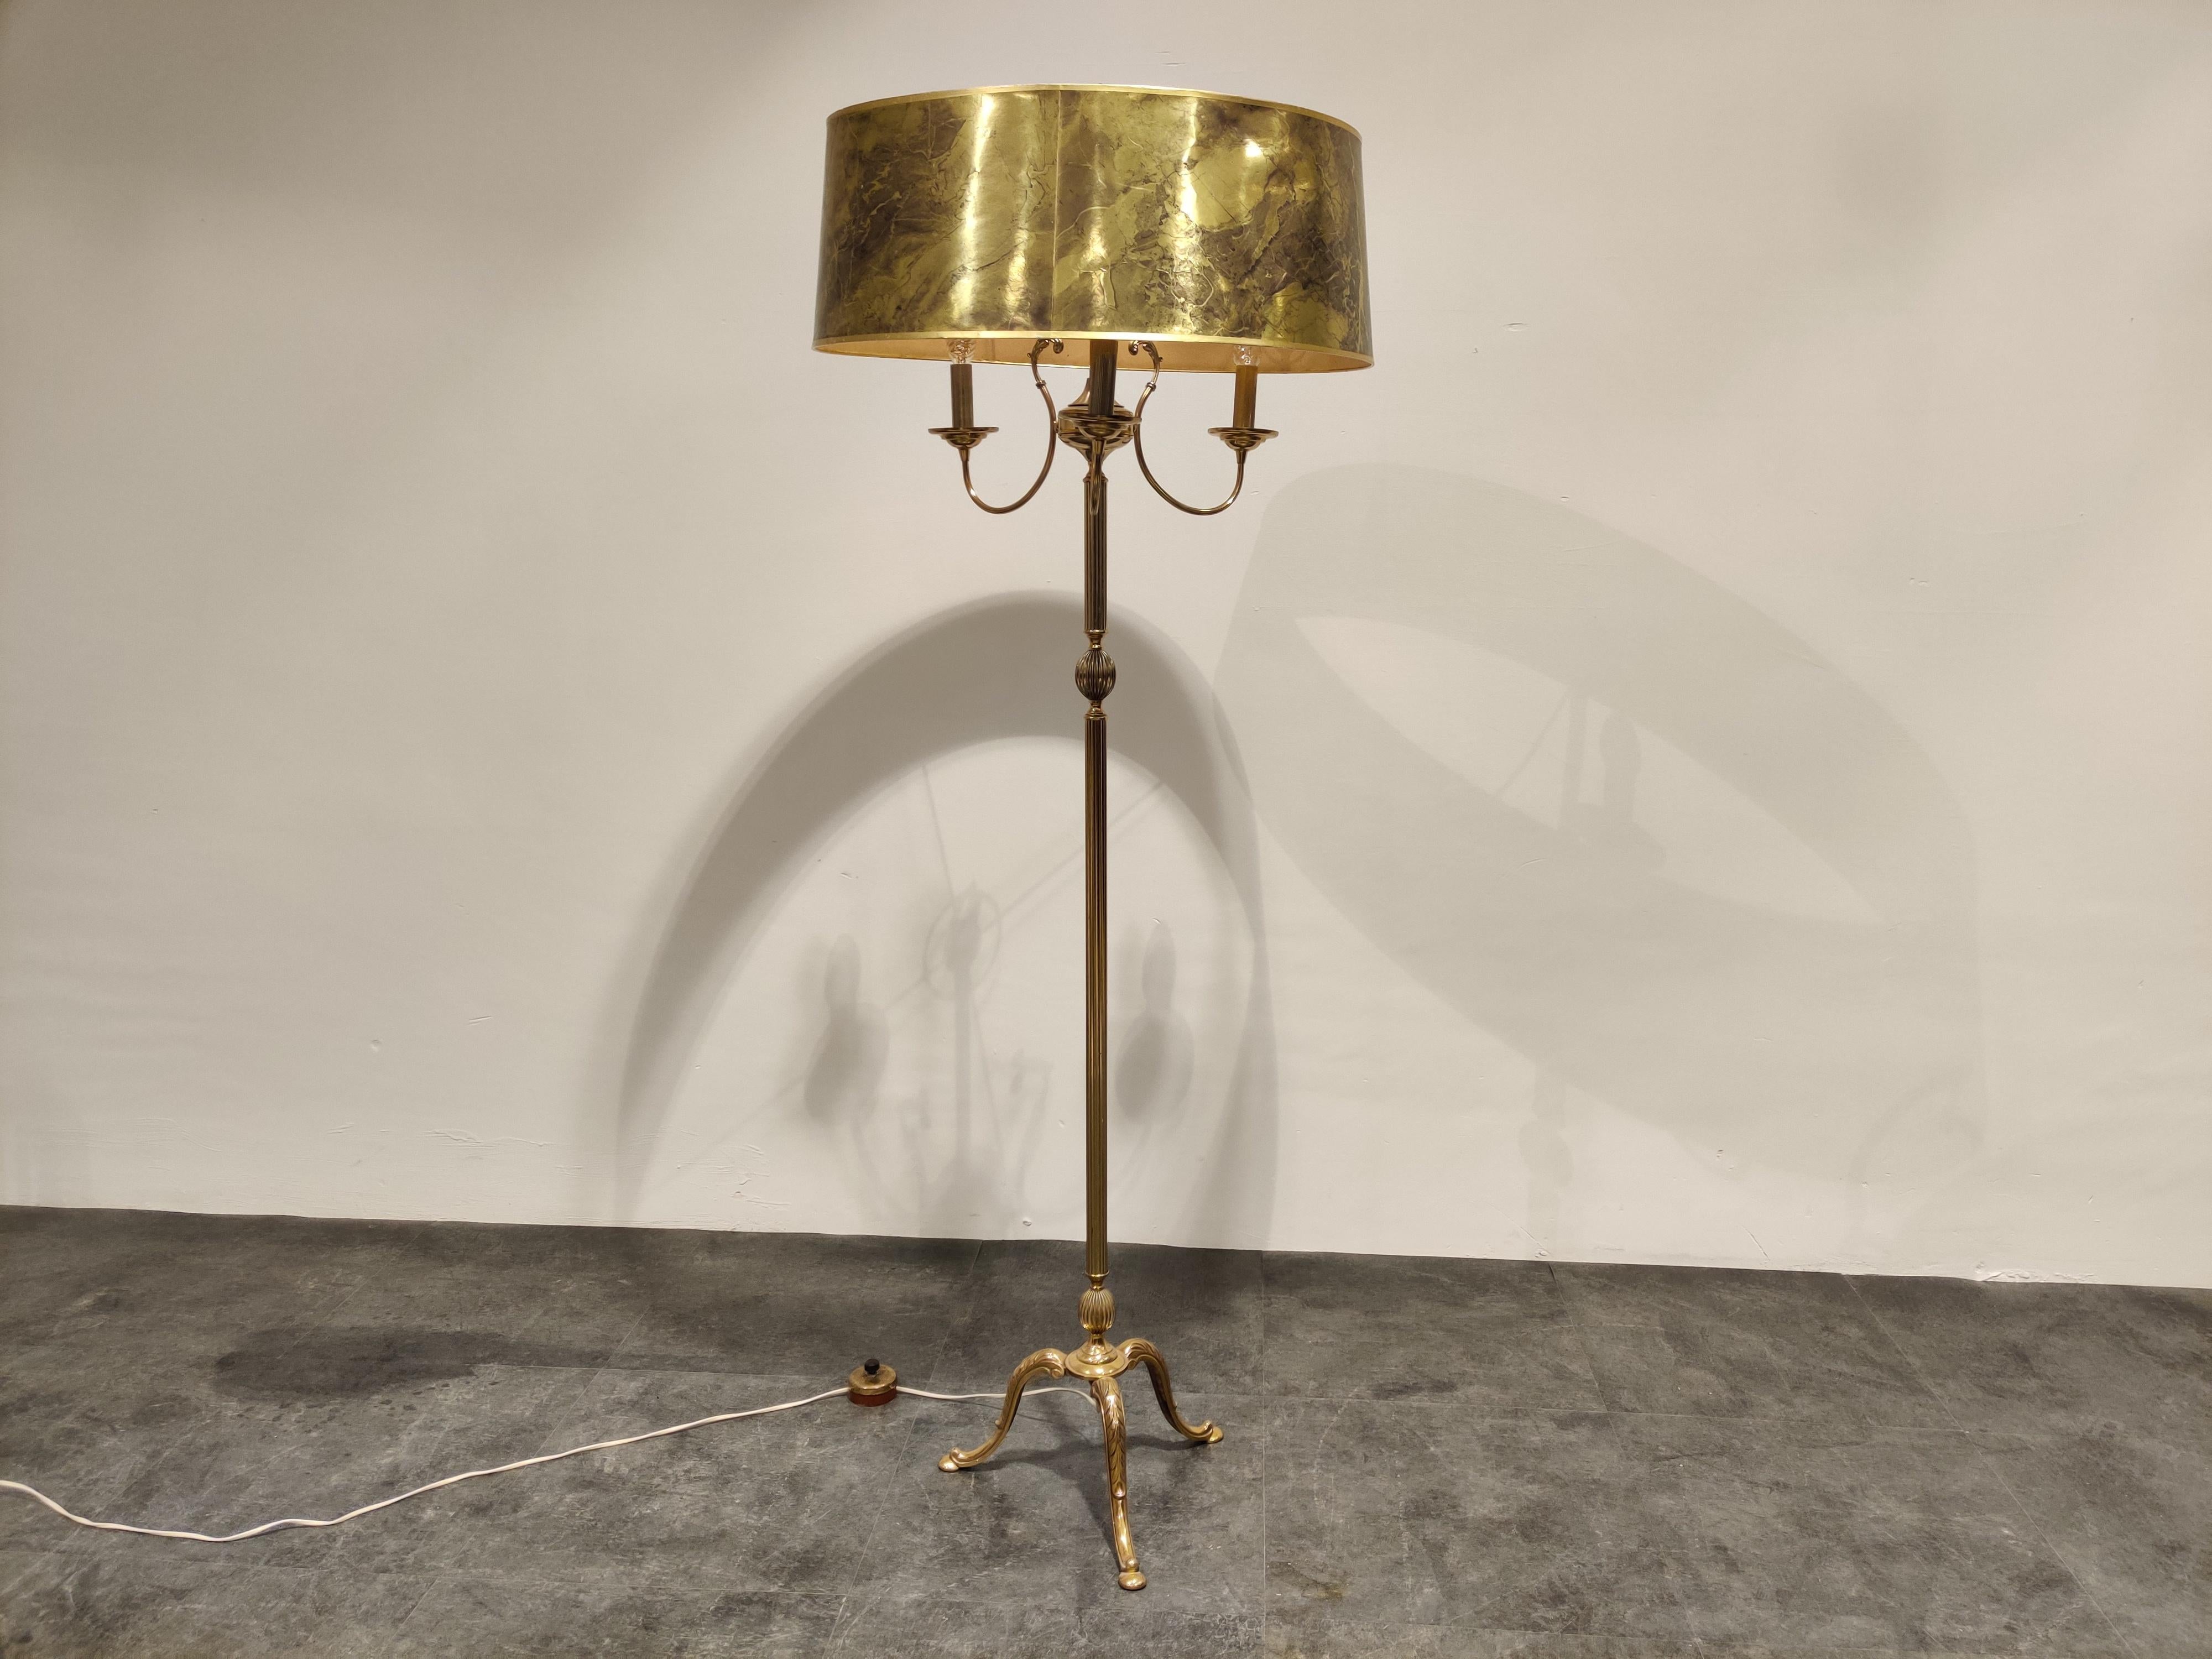 Vintage brass neoclassical tripod floor lamp with three candelabra lightpoints.

The lamp comes with it's beautiful original flamed golden shade.

The floor lamp emits a beautiful light and has a great look.

Works with 3 E14 light